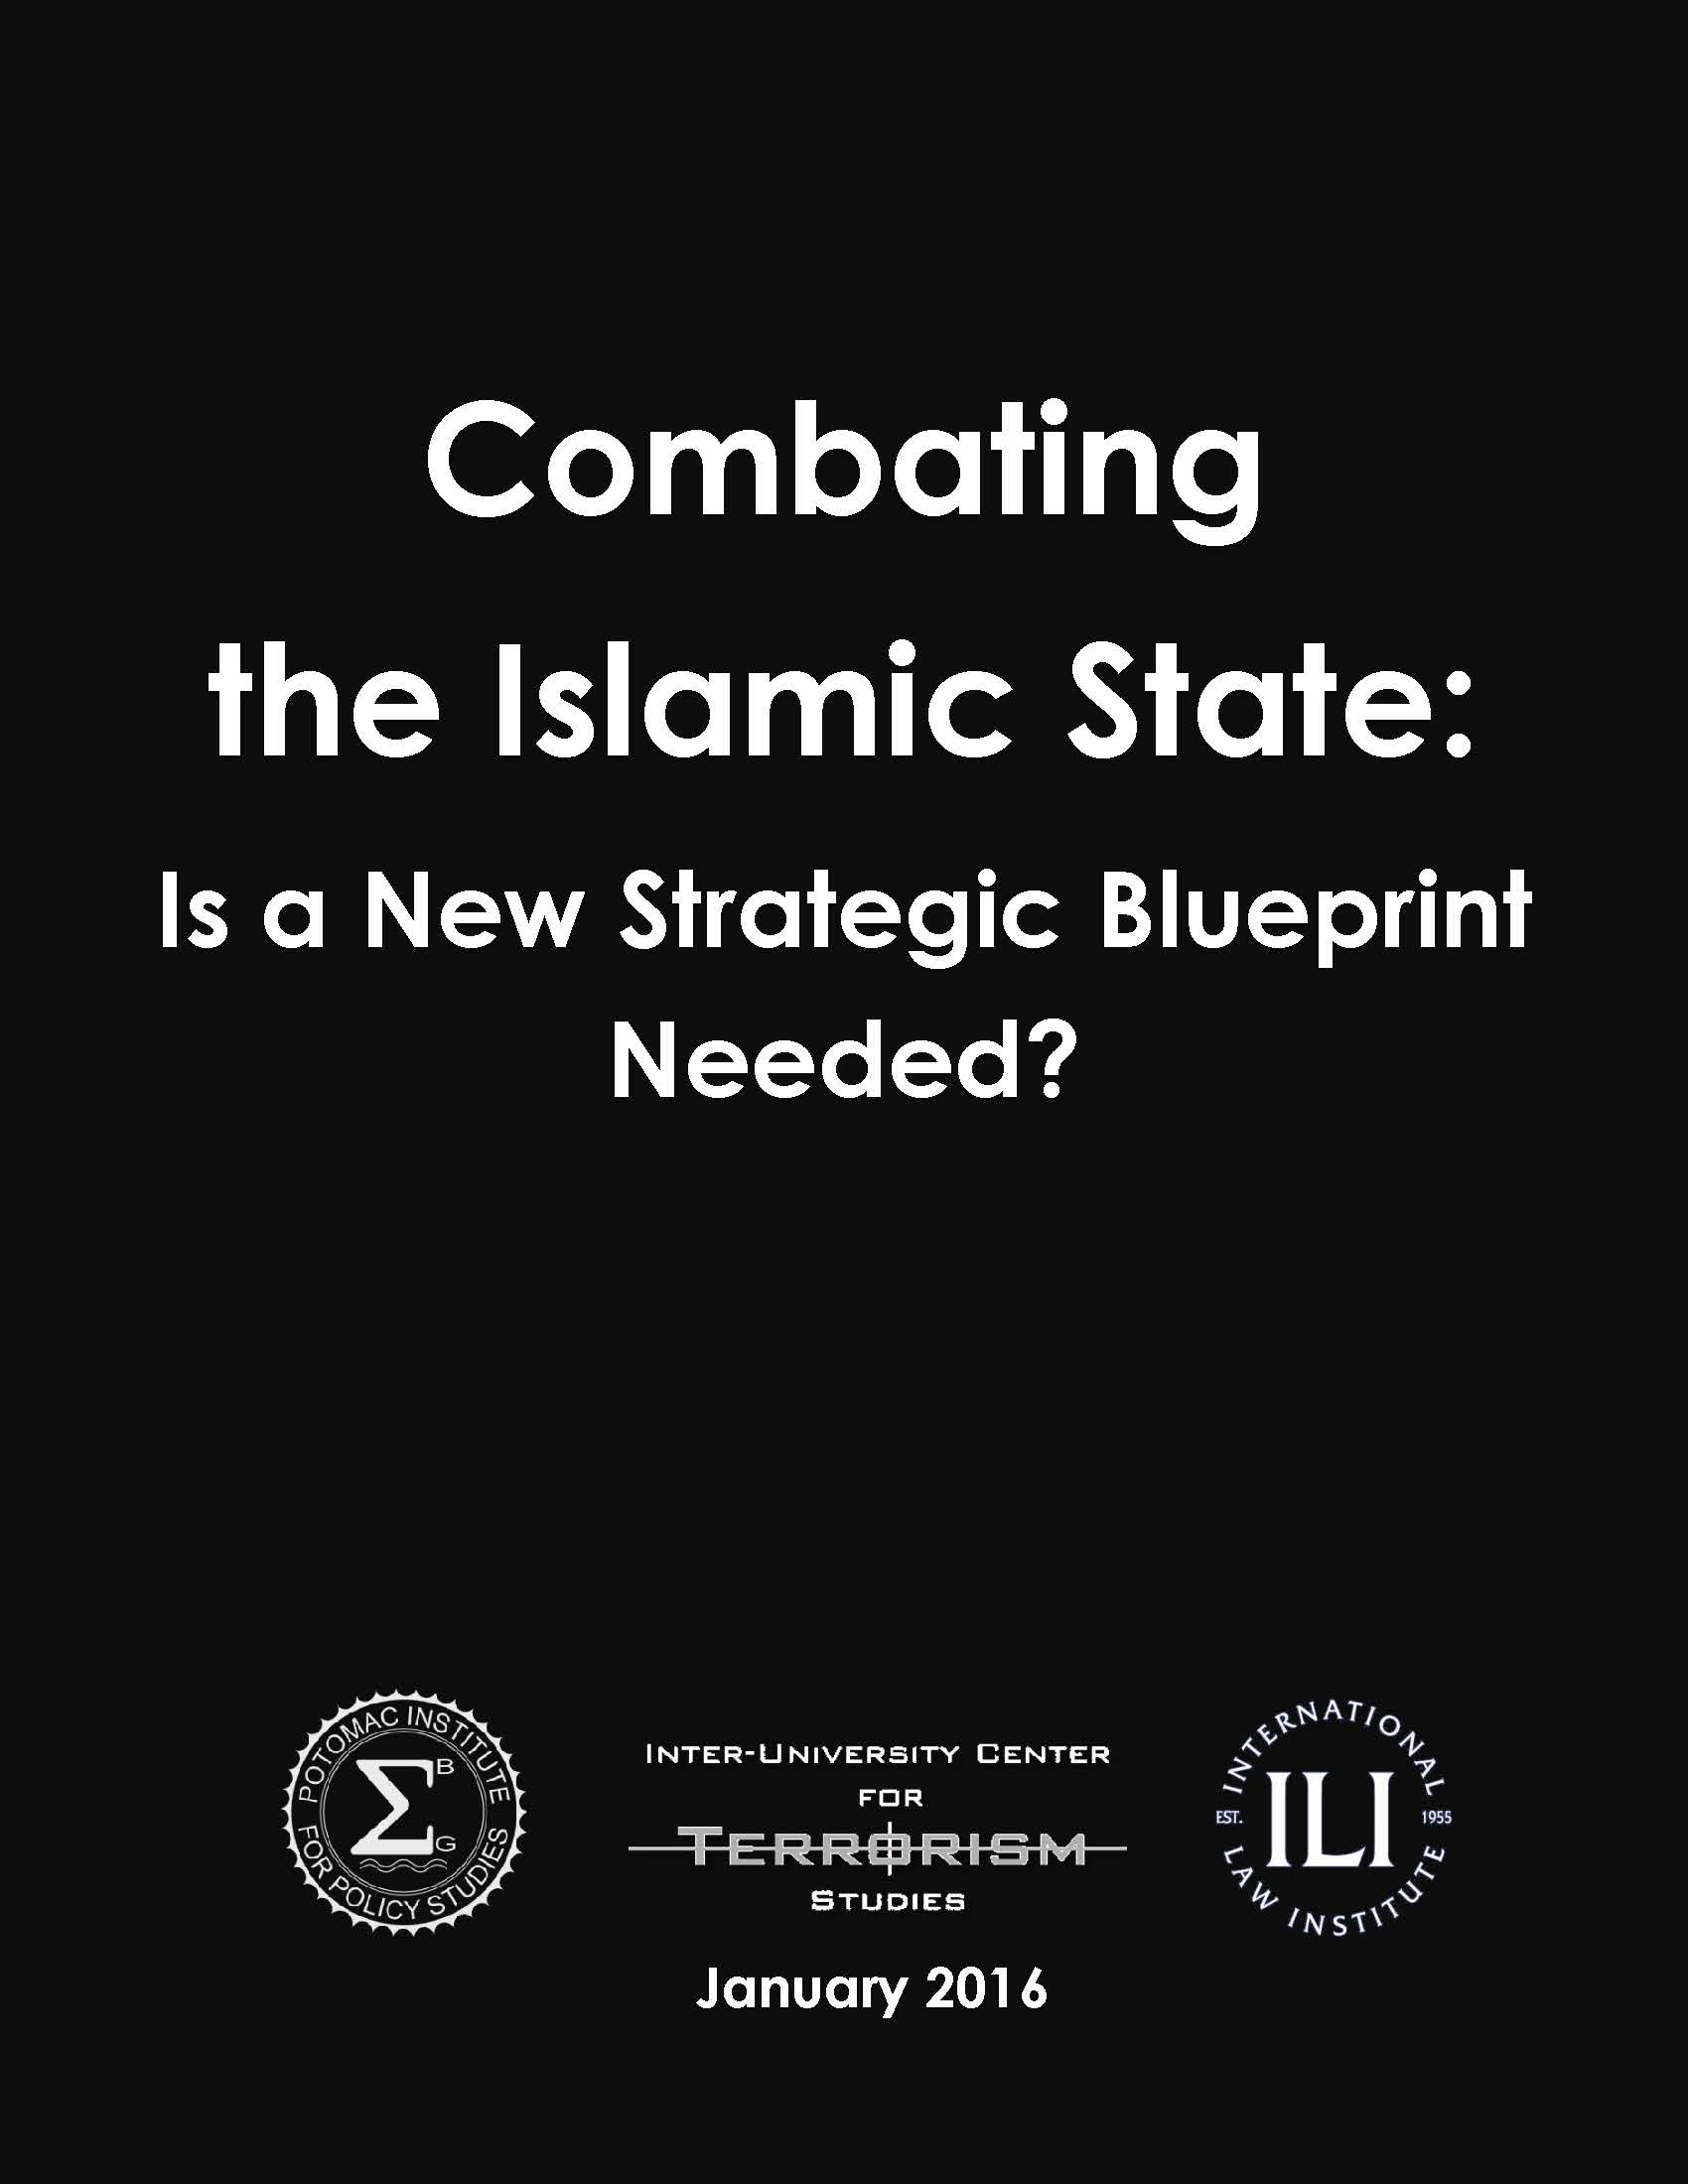 Combating the Islamic State: Is a New Strategic Blueprint Needed?